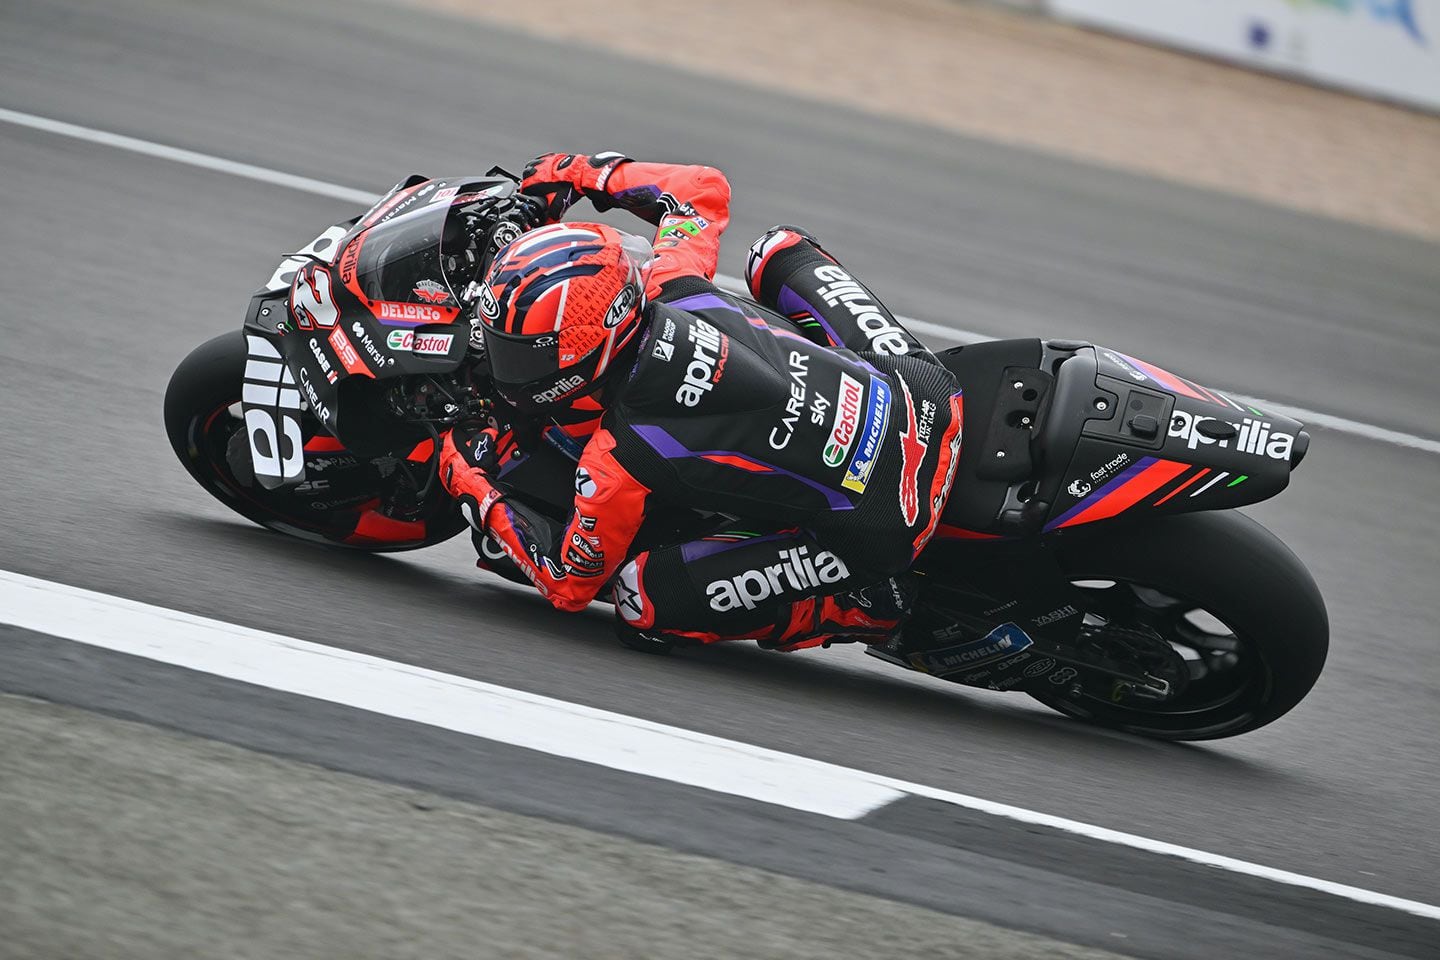 Maverick Viñales looked strong in Silverstone. He finished third in Saturday’s sprint race, and fifth on Sunday.